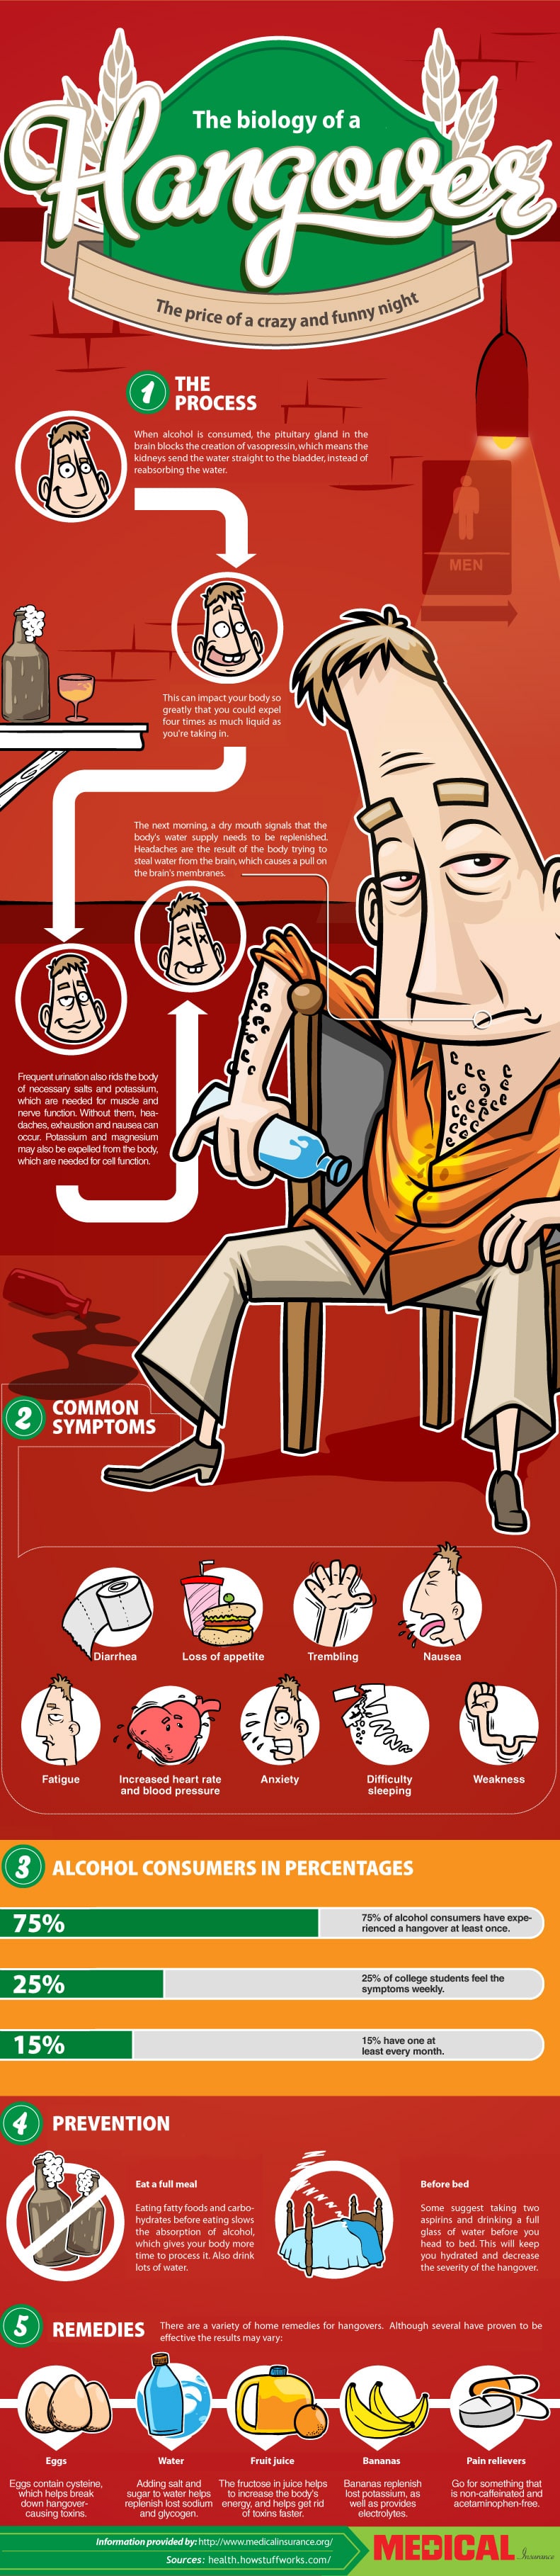 Biology Of A Hangover & How To Prevent It [Infographic]